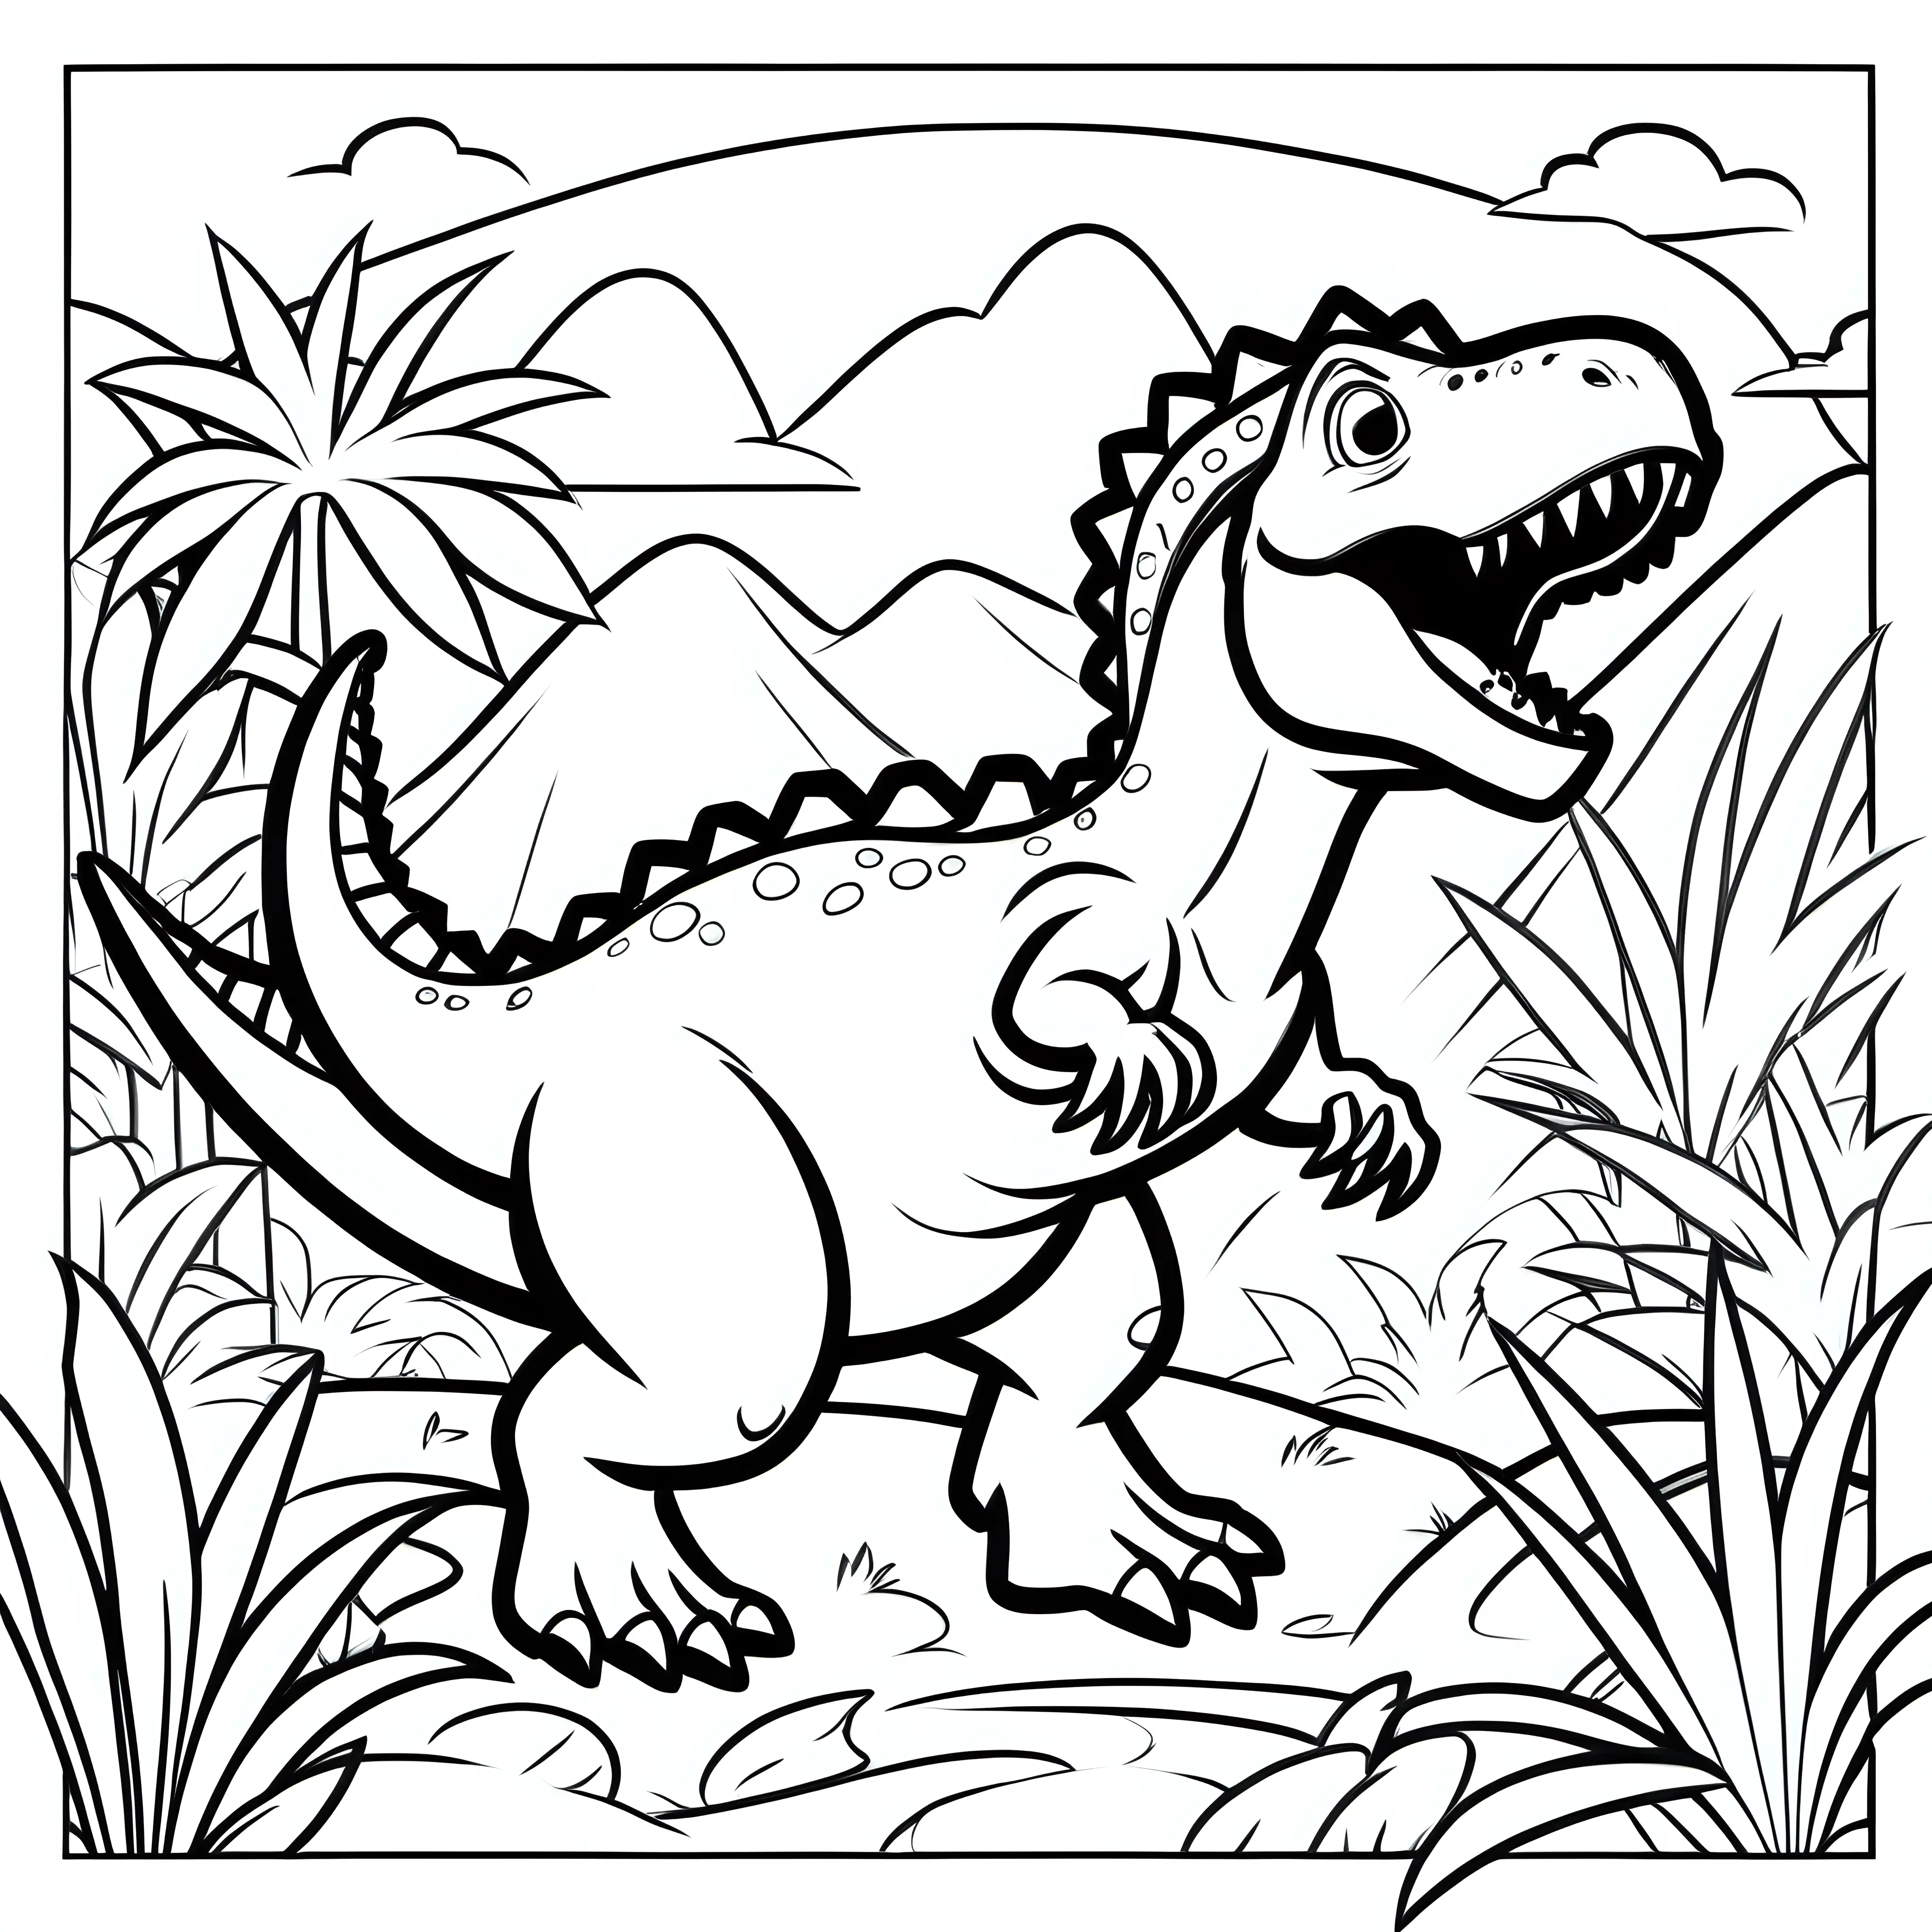 Simple black line Children's dinosaur fight colouring book page